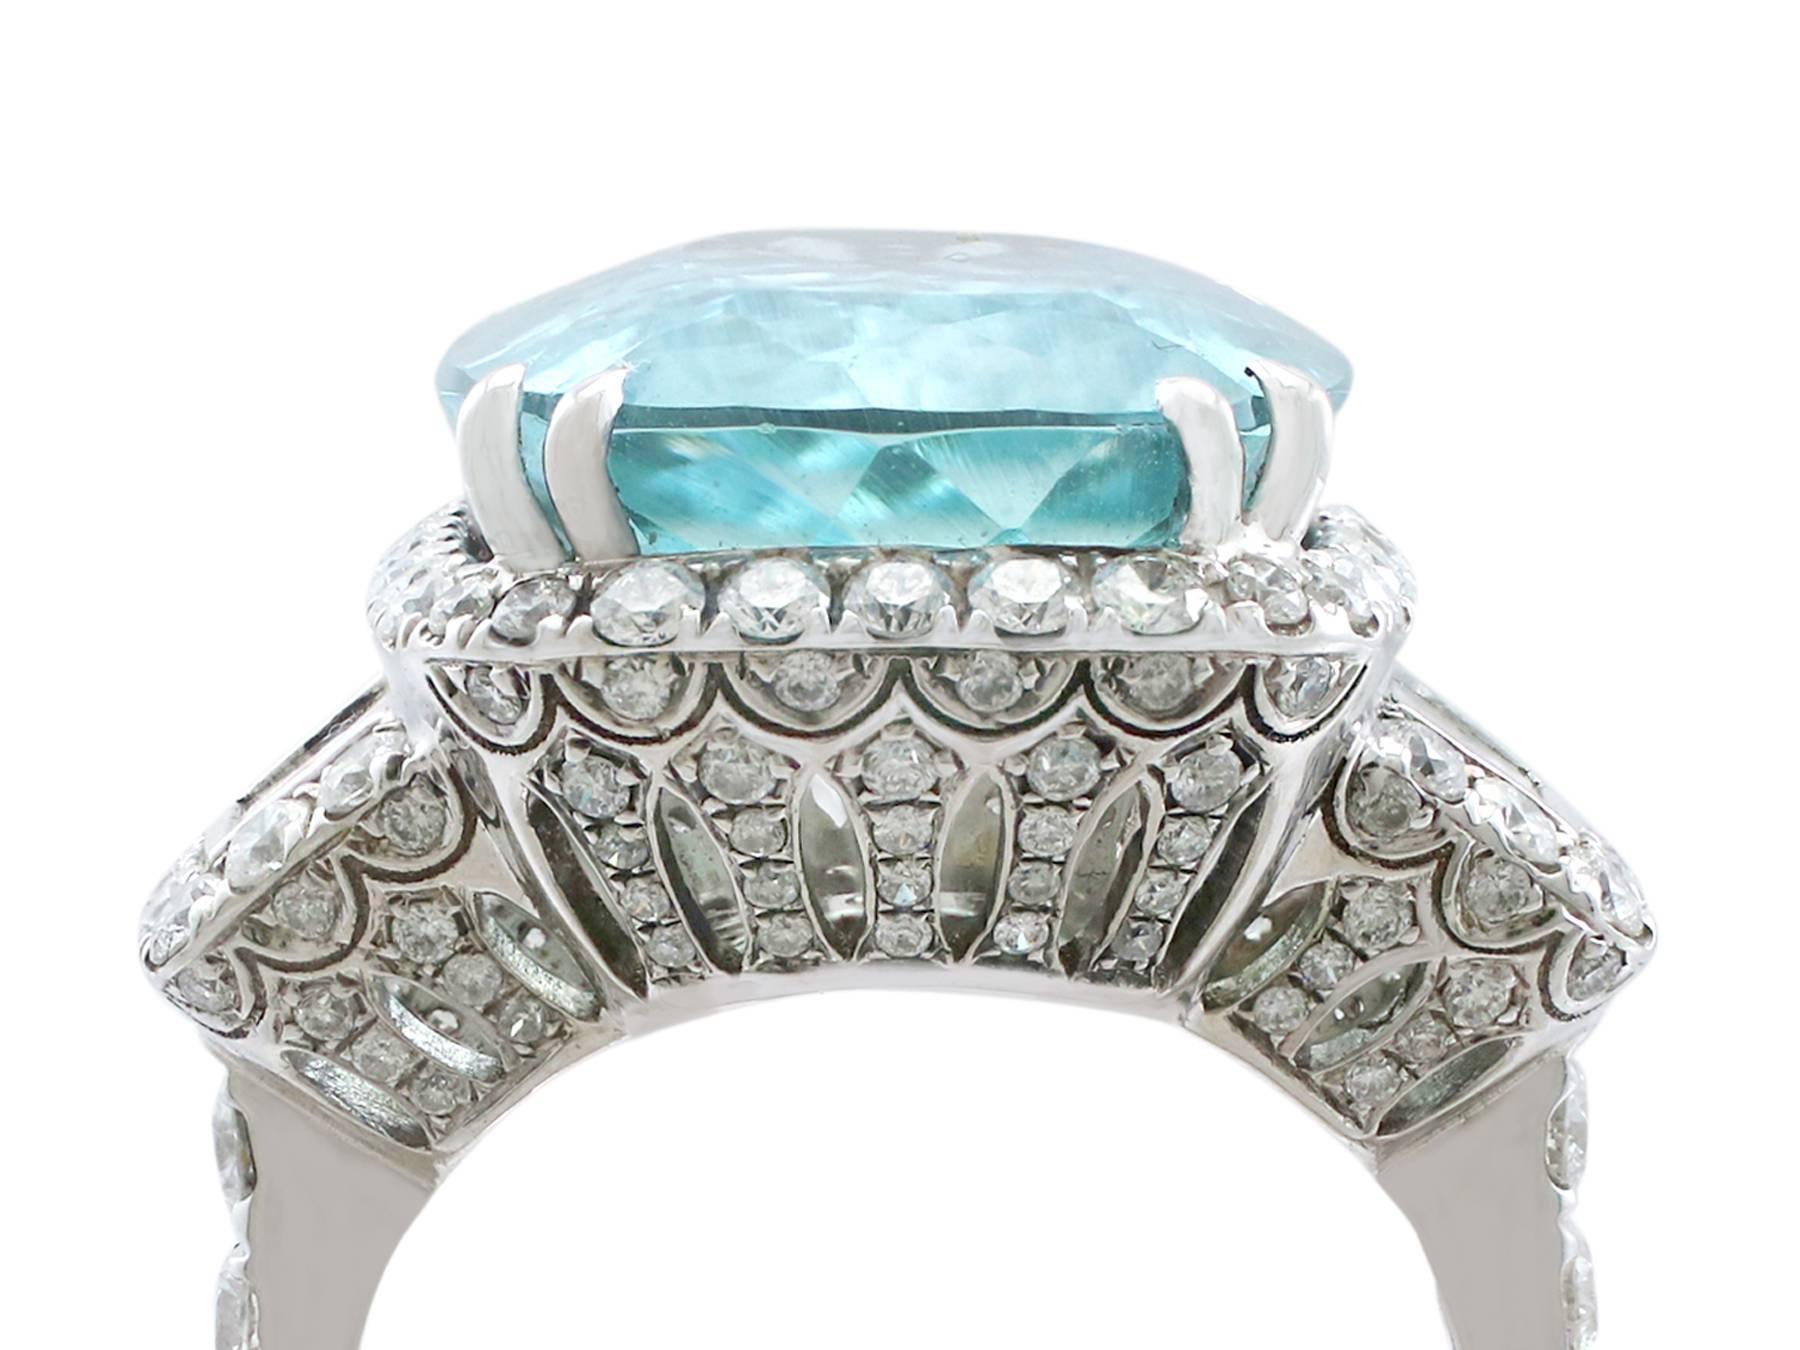 A stunning, fine and impressive vintage 15.01 carat aquamarine and 3.28 carat diamond (total), 18 karat white gold dress ring; part of our diverse gemstone jewelry collection

This stunning, fine and impressive large aquamarine ring has been crafted